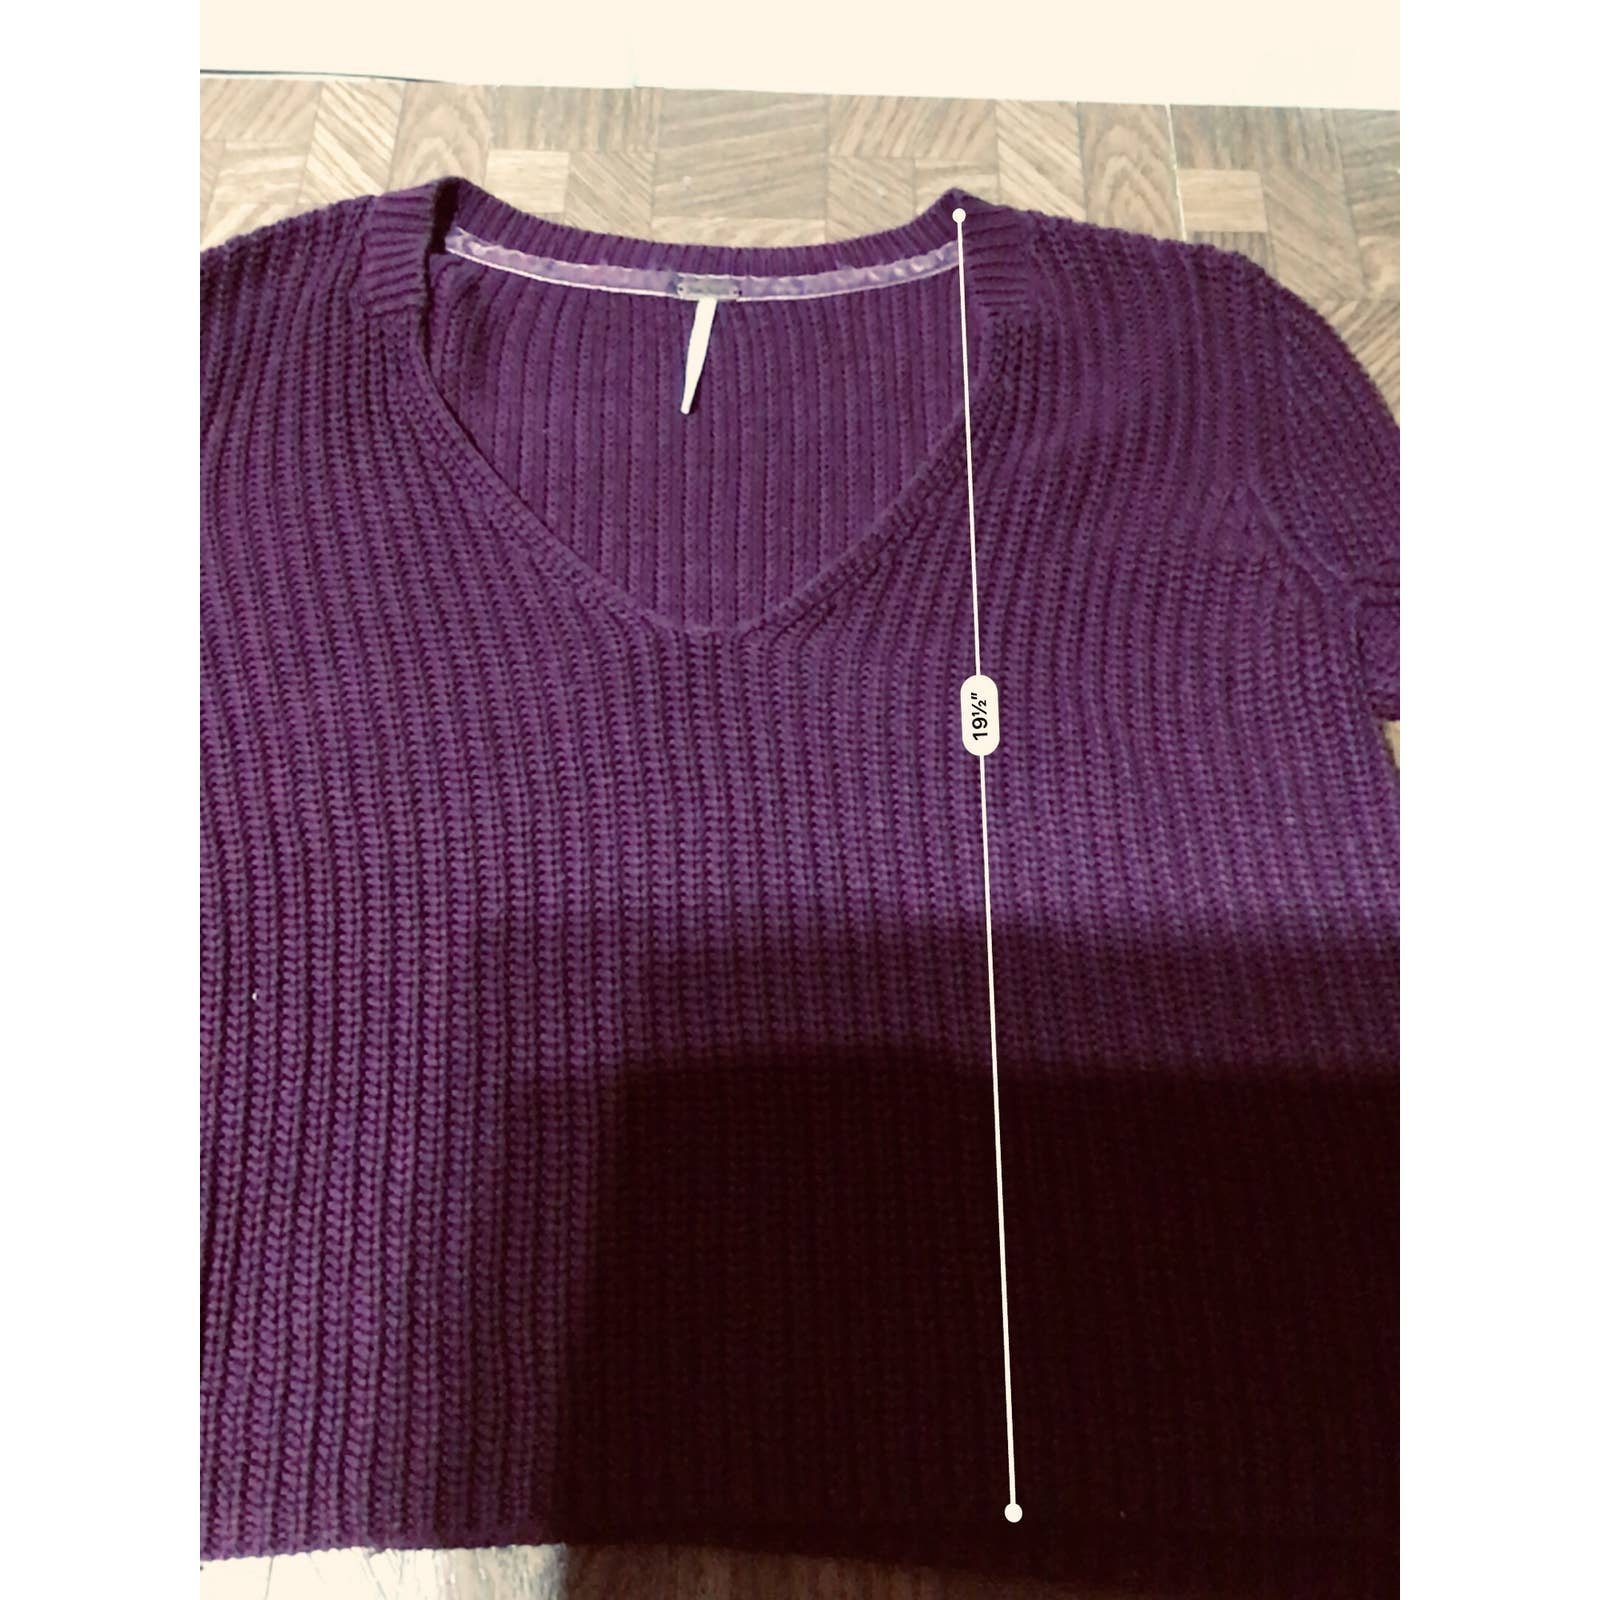 Wholesale price Free People Damsel Bell Sleeve deep purple Pullover Cropped Knit Sweater M fv7VPjRzS outlet online shop